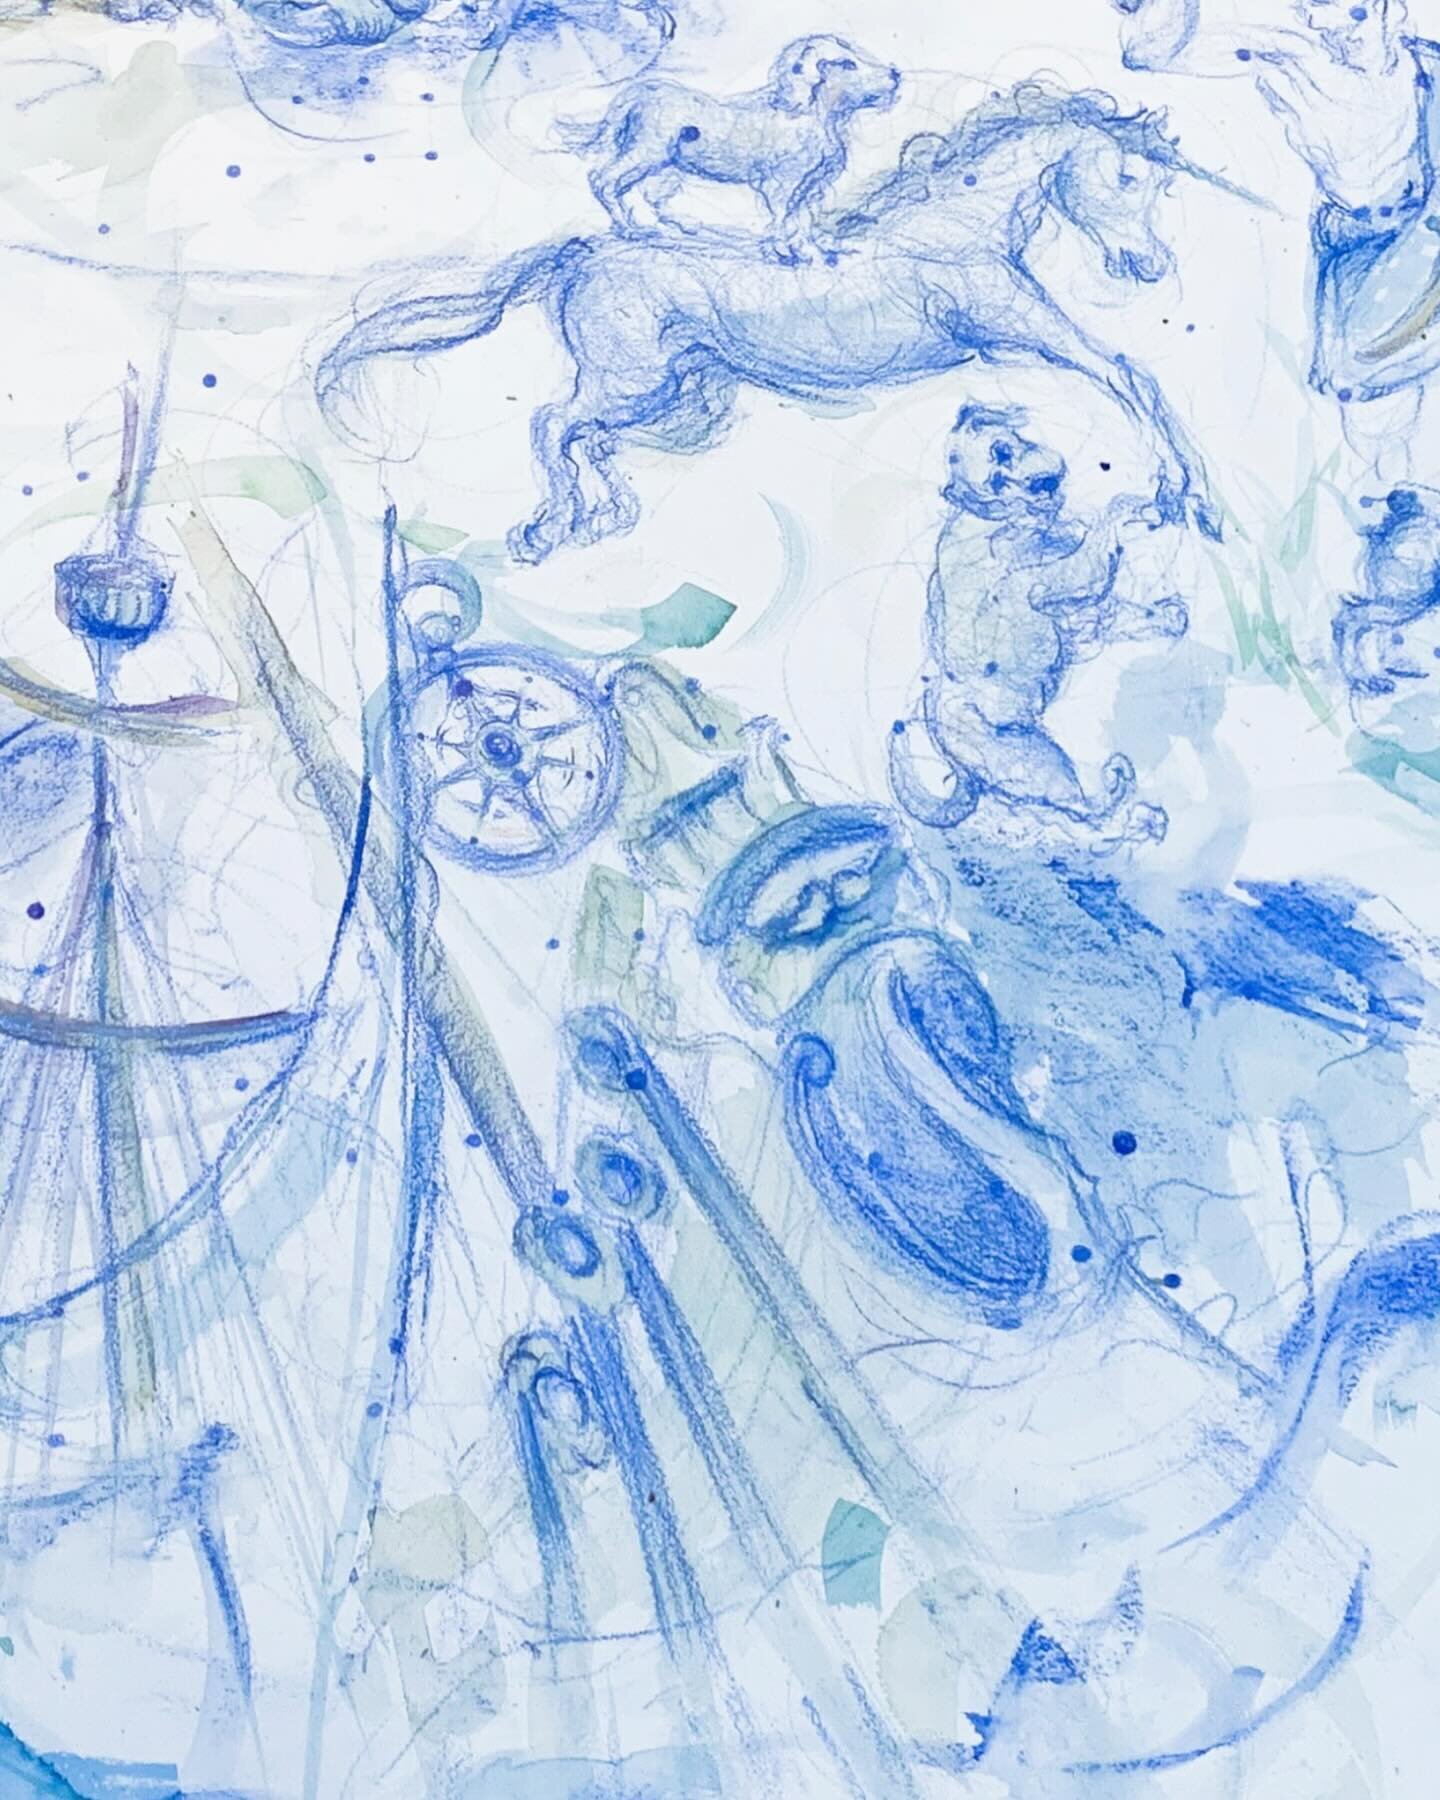 Looking back!

Detail from the roll constellation piece I had up as part of our Drawing Beyond graduate exhibition with the Royal Drawing School
.
.
.
.
@drawingstudio23 
@royaldrawingschool 

#DrawingStudio23 #ODDY23 #RDSODDY23 #OnlineDrawingDevelop